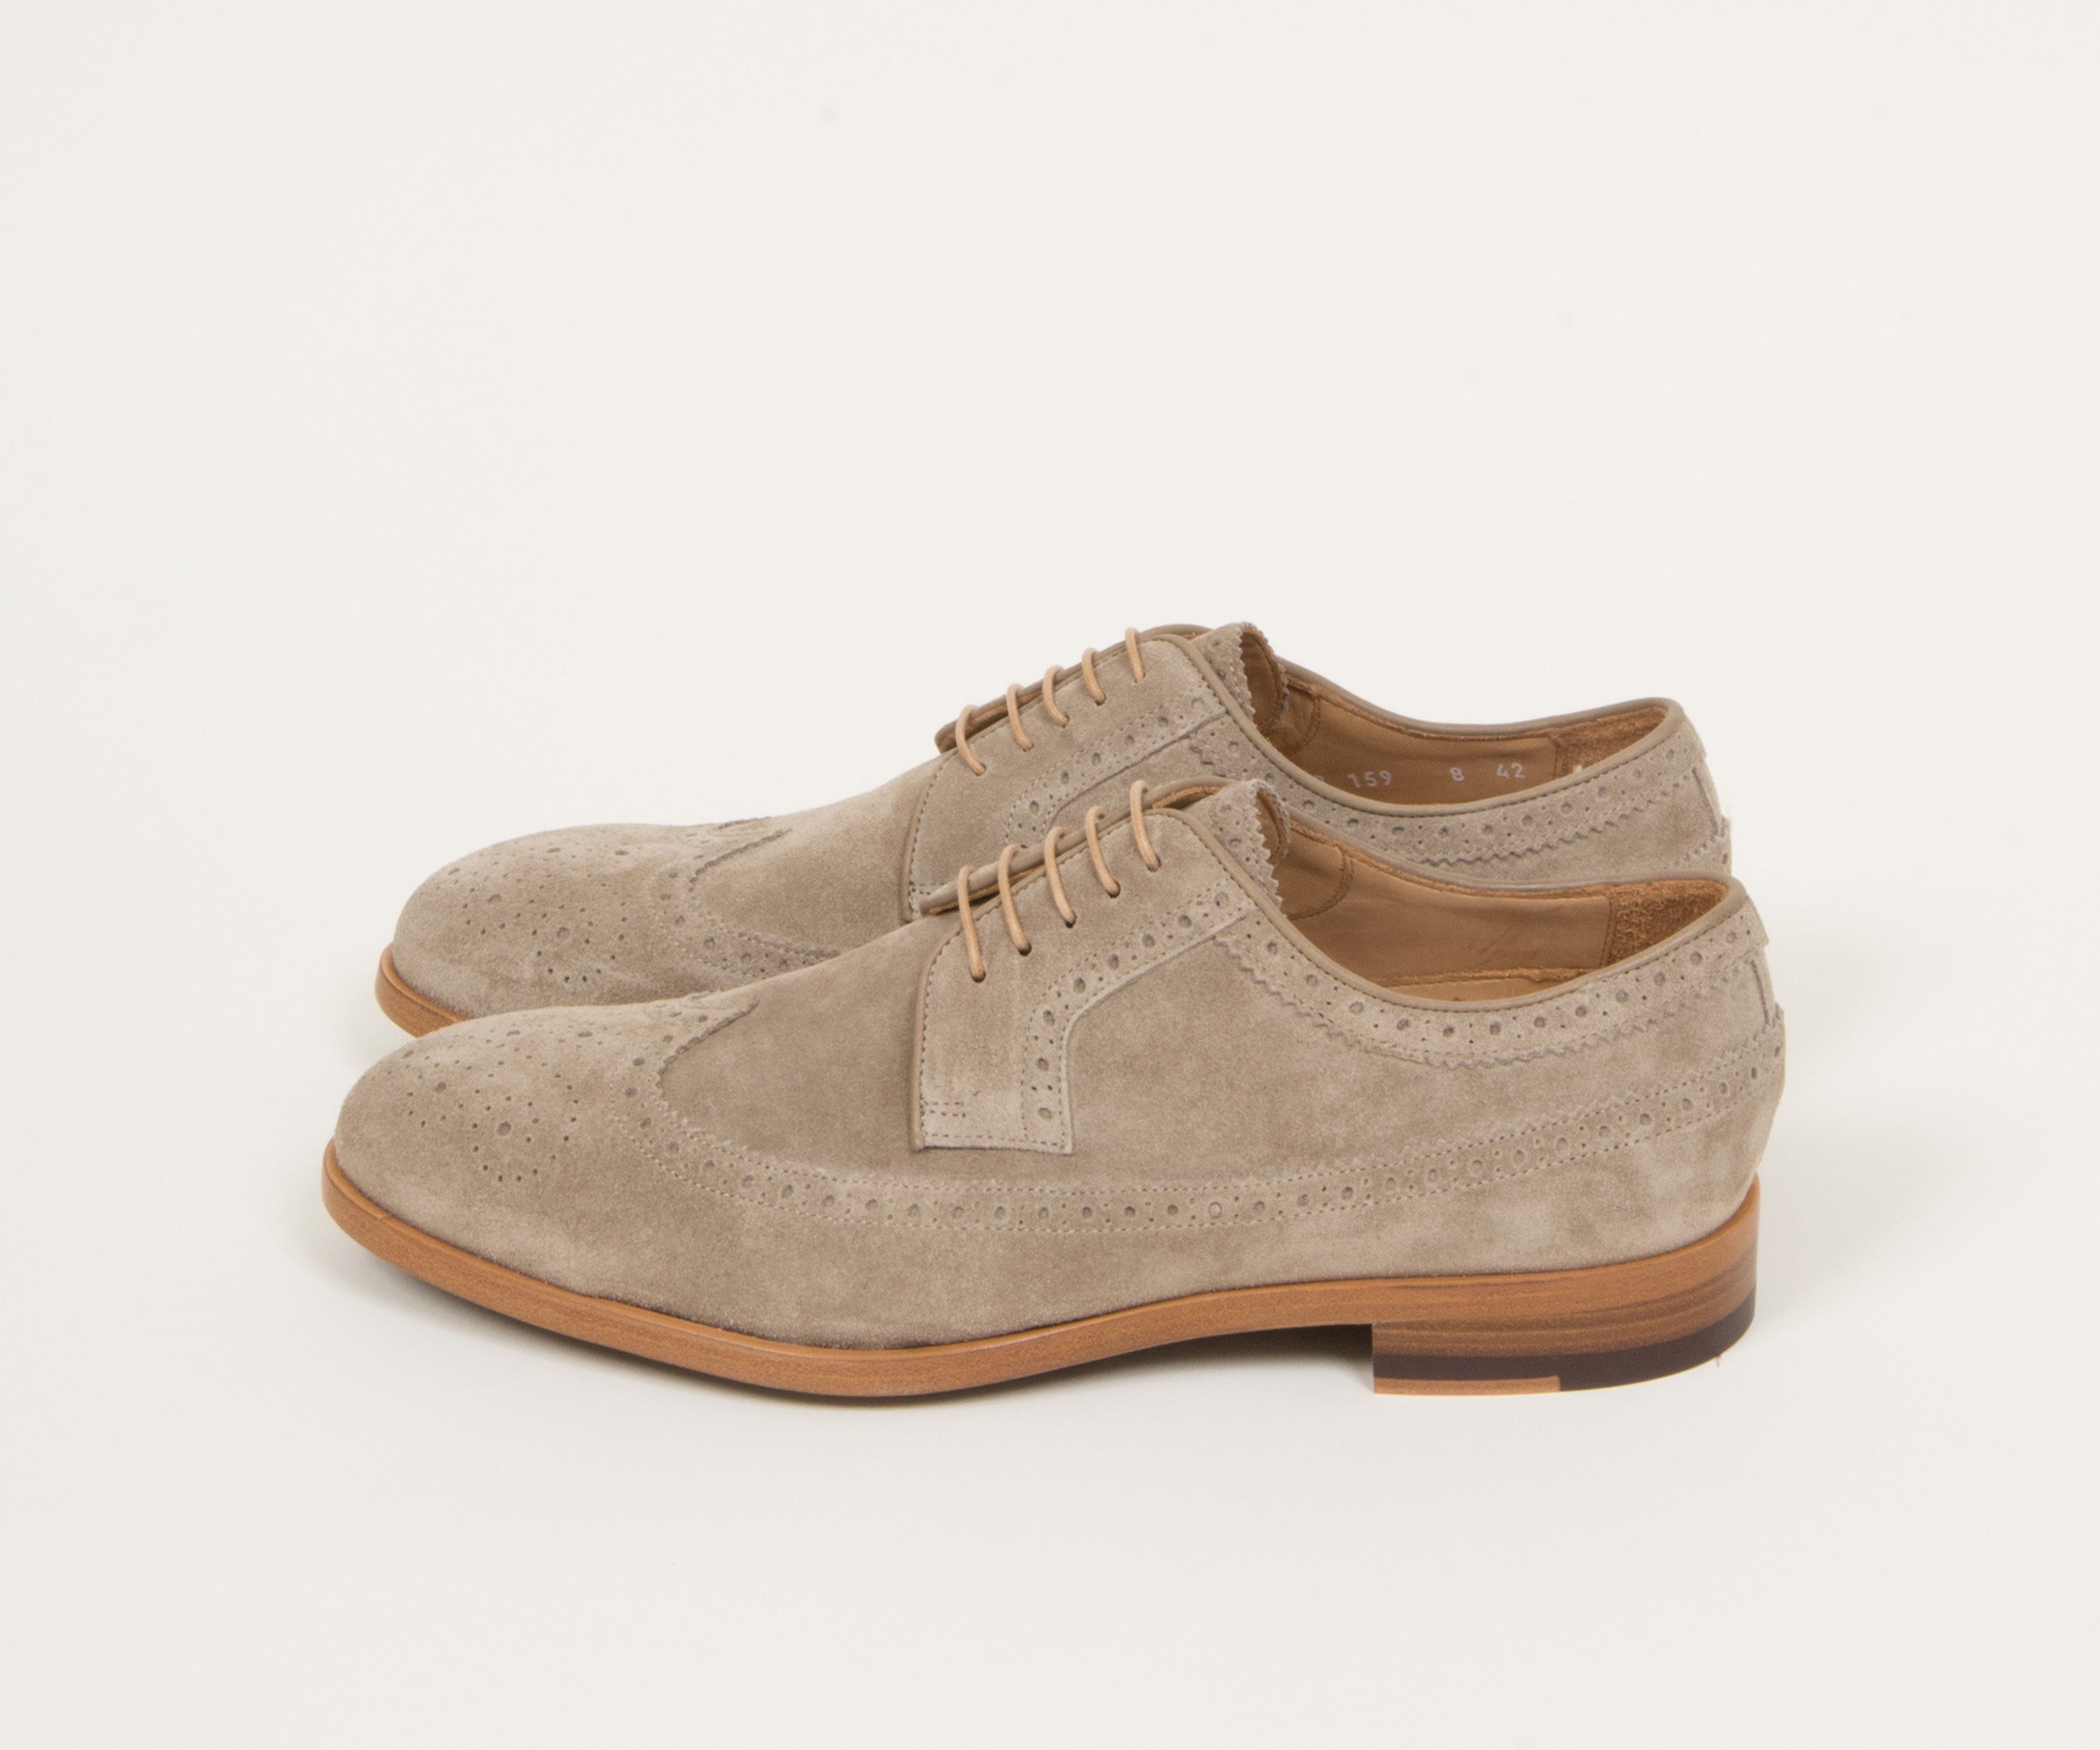 Paul Smith Shoes 'Talbot' Suede Brogue Beige